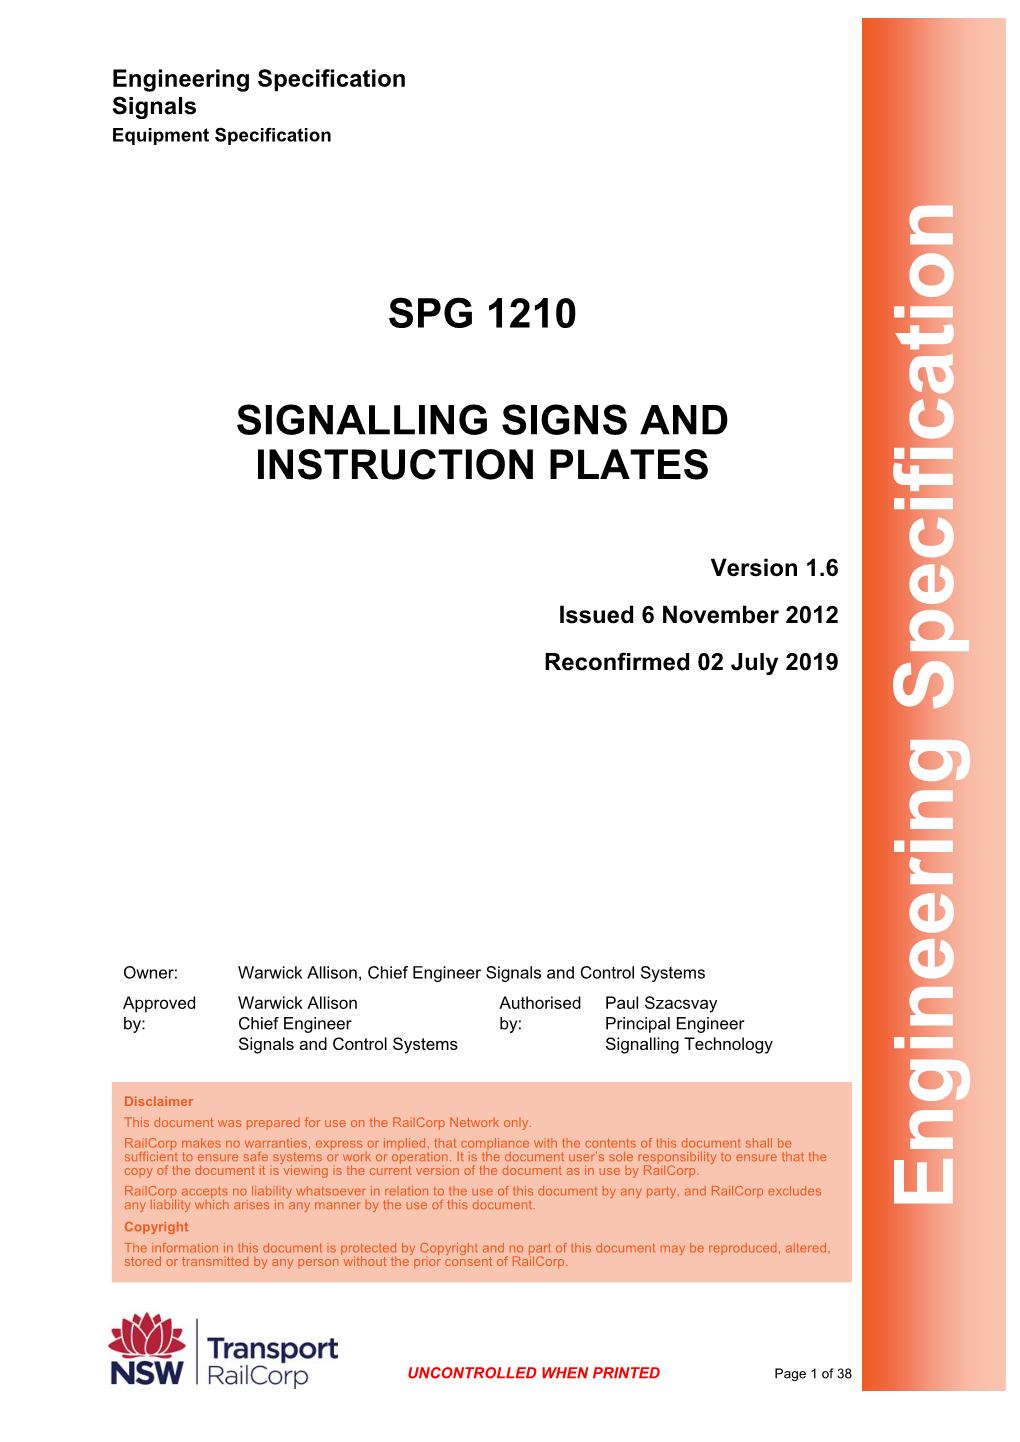 SPG 1210 Signalling Signs and Instruction Plates